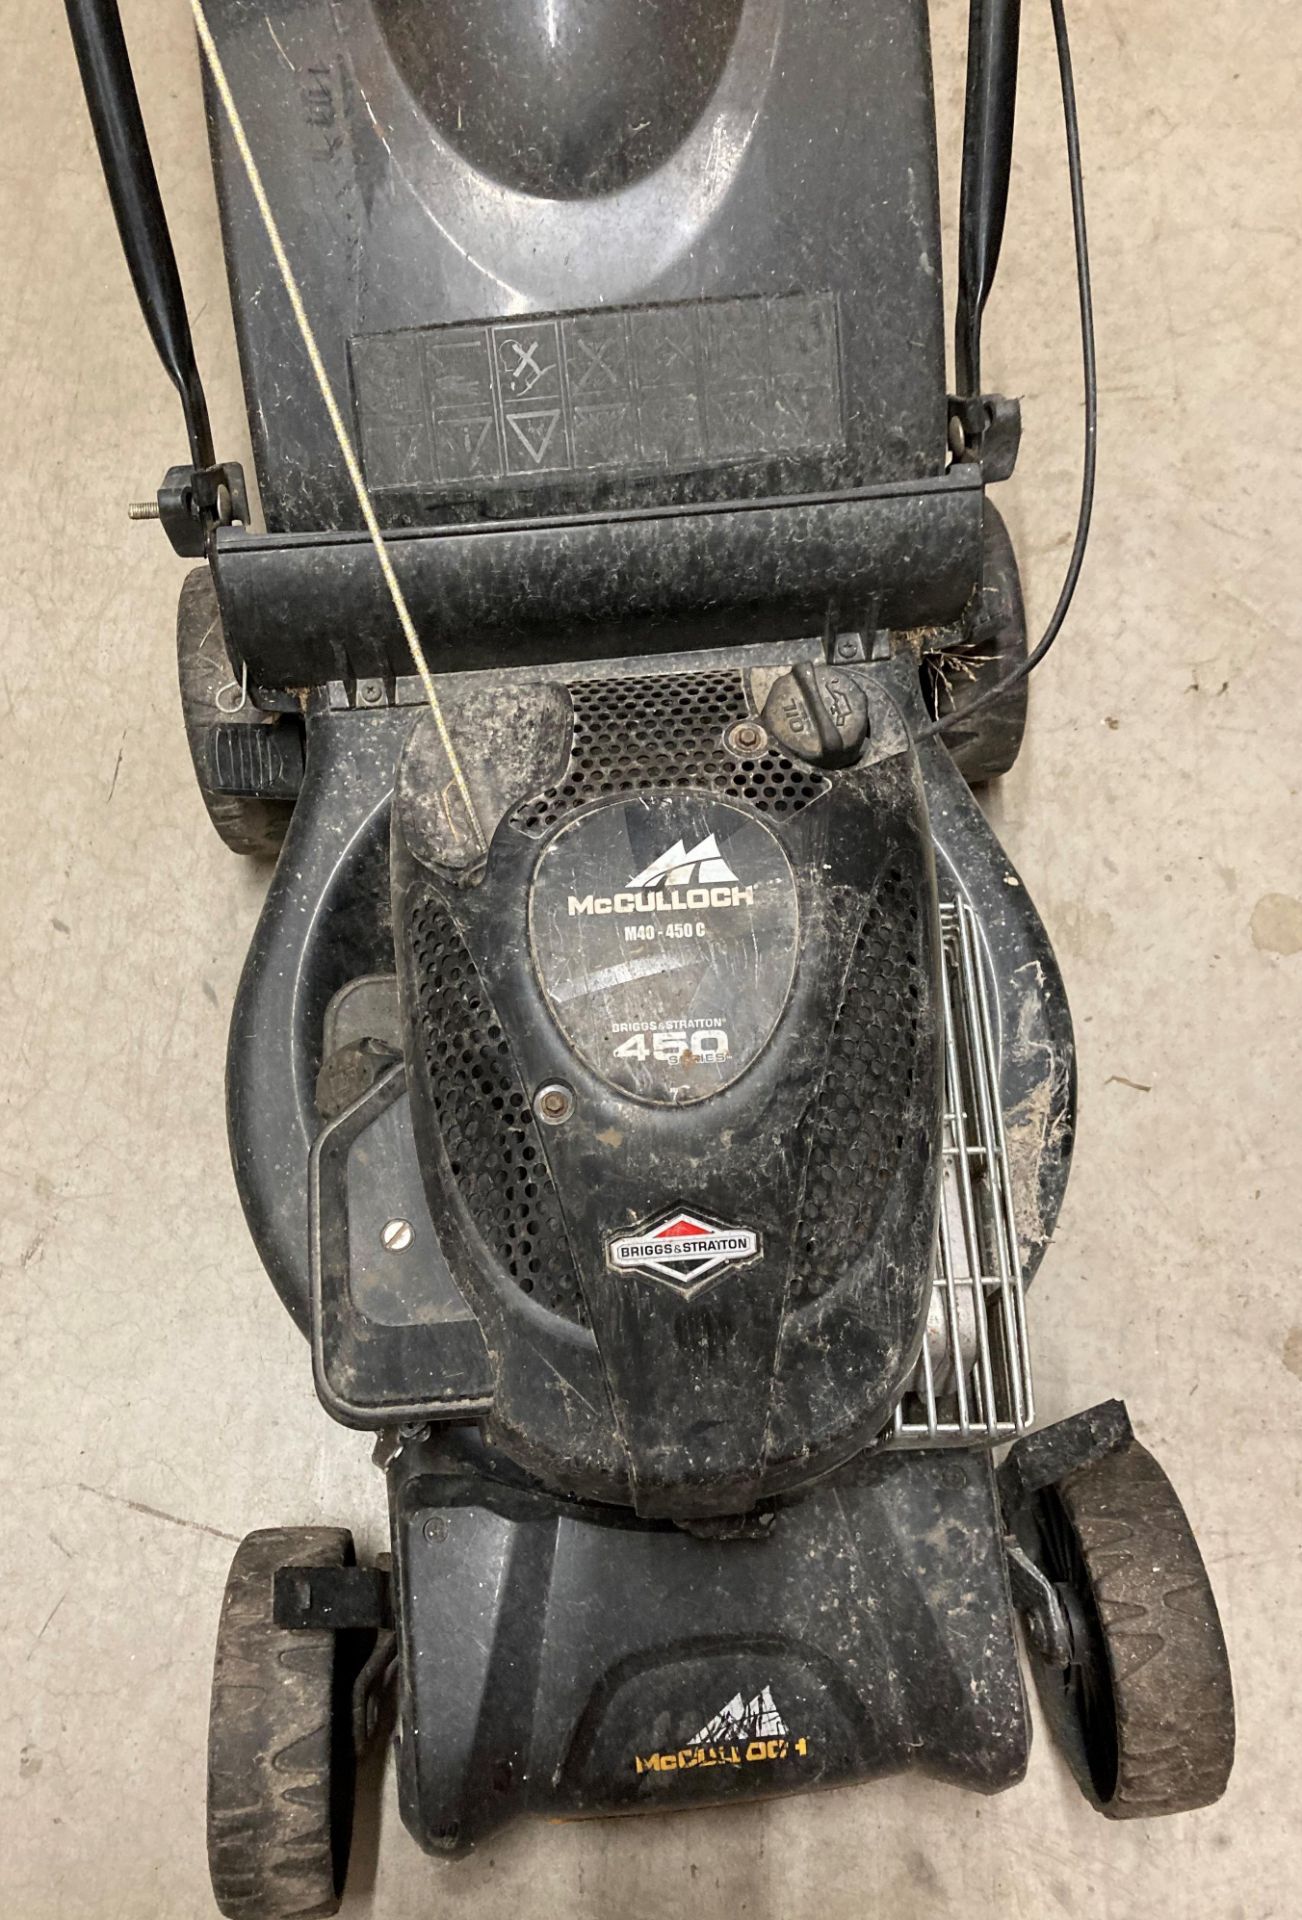 A McCulloch M40 - 450G petrol rotary lawn mower with Briggs and Stratton 450 series engine and - Image 2 of 2